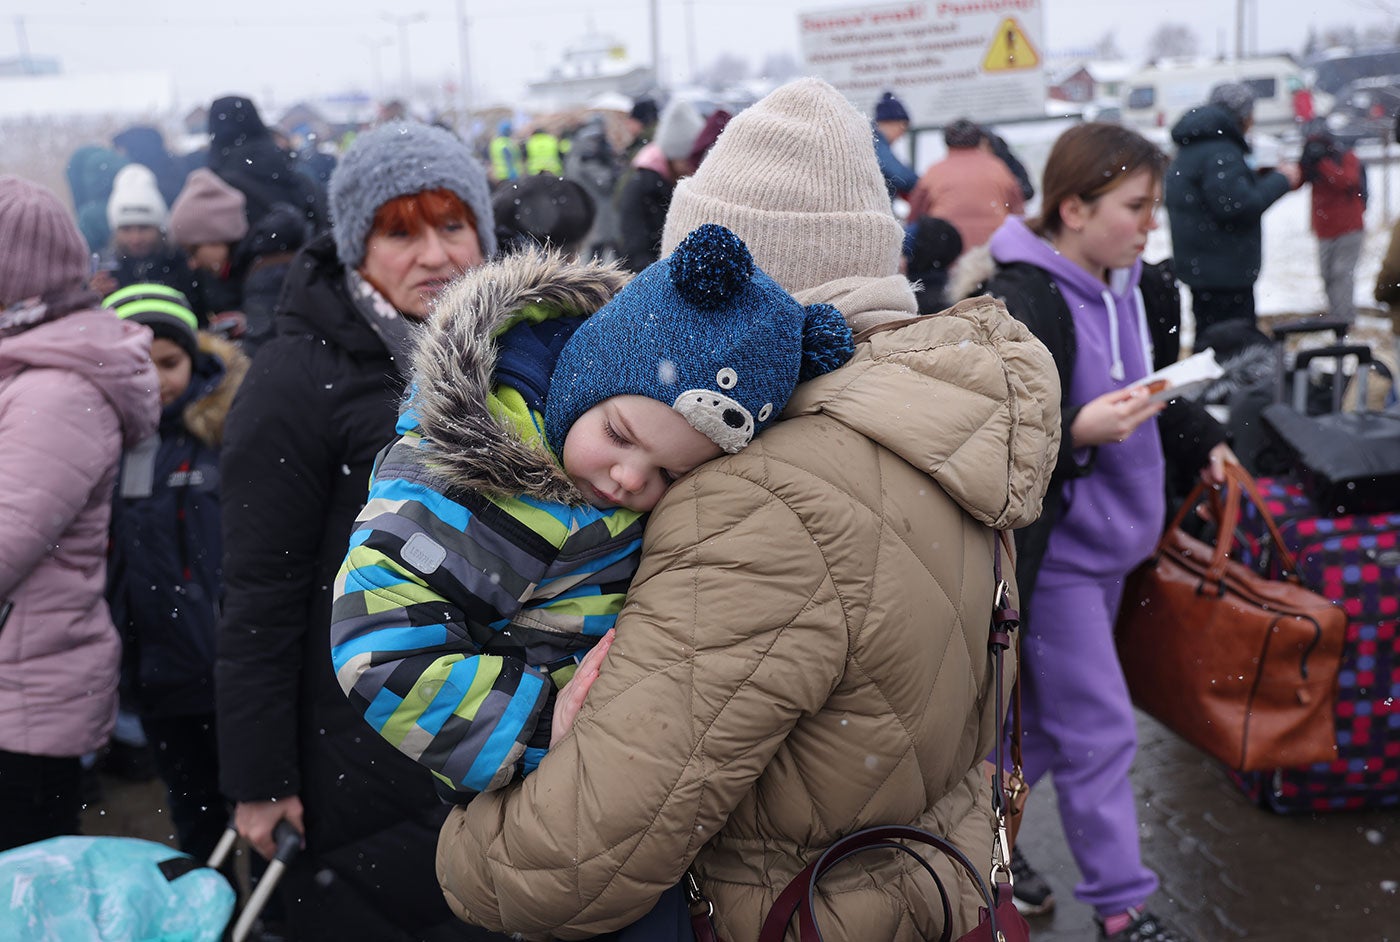 A large group of Ukrainians, many wearing winter clothing and carrying luggage, stand in a group. In the foreground, a parent holds a child.